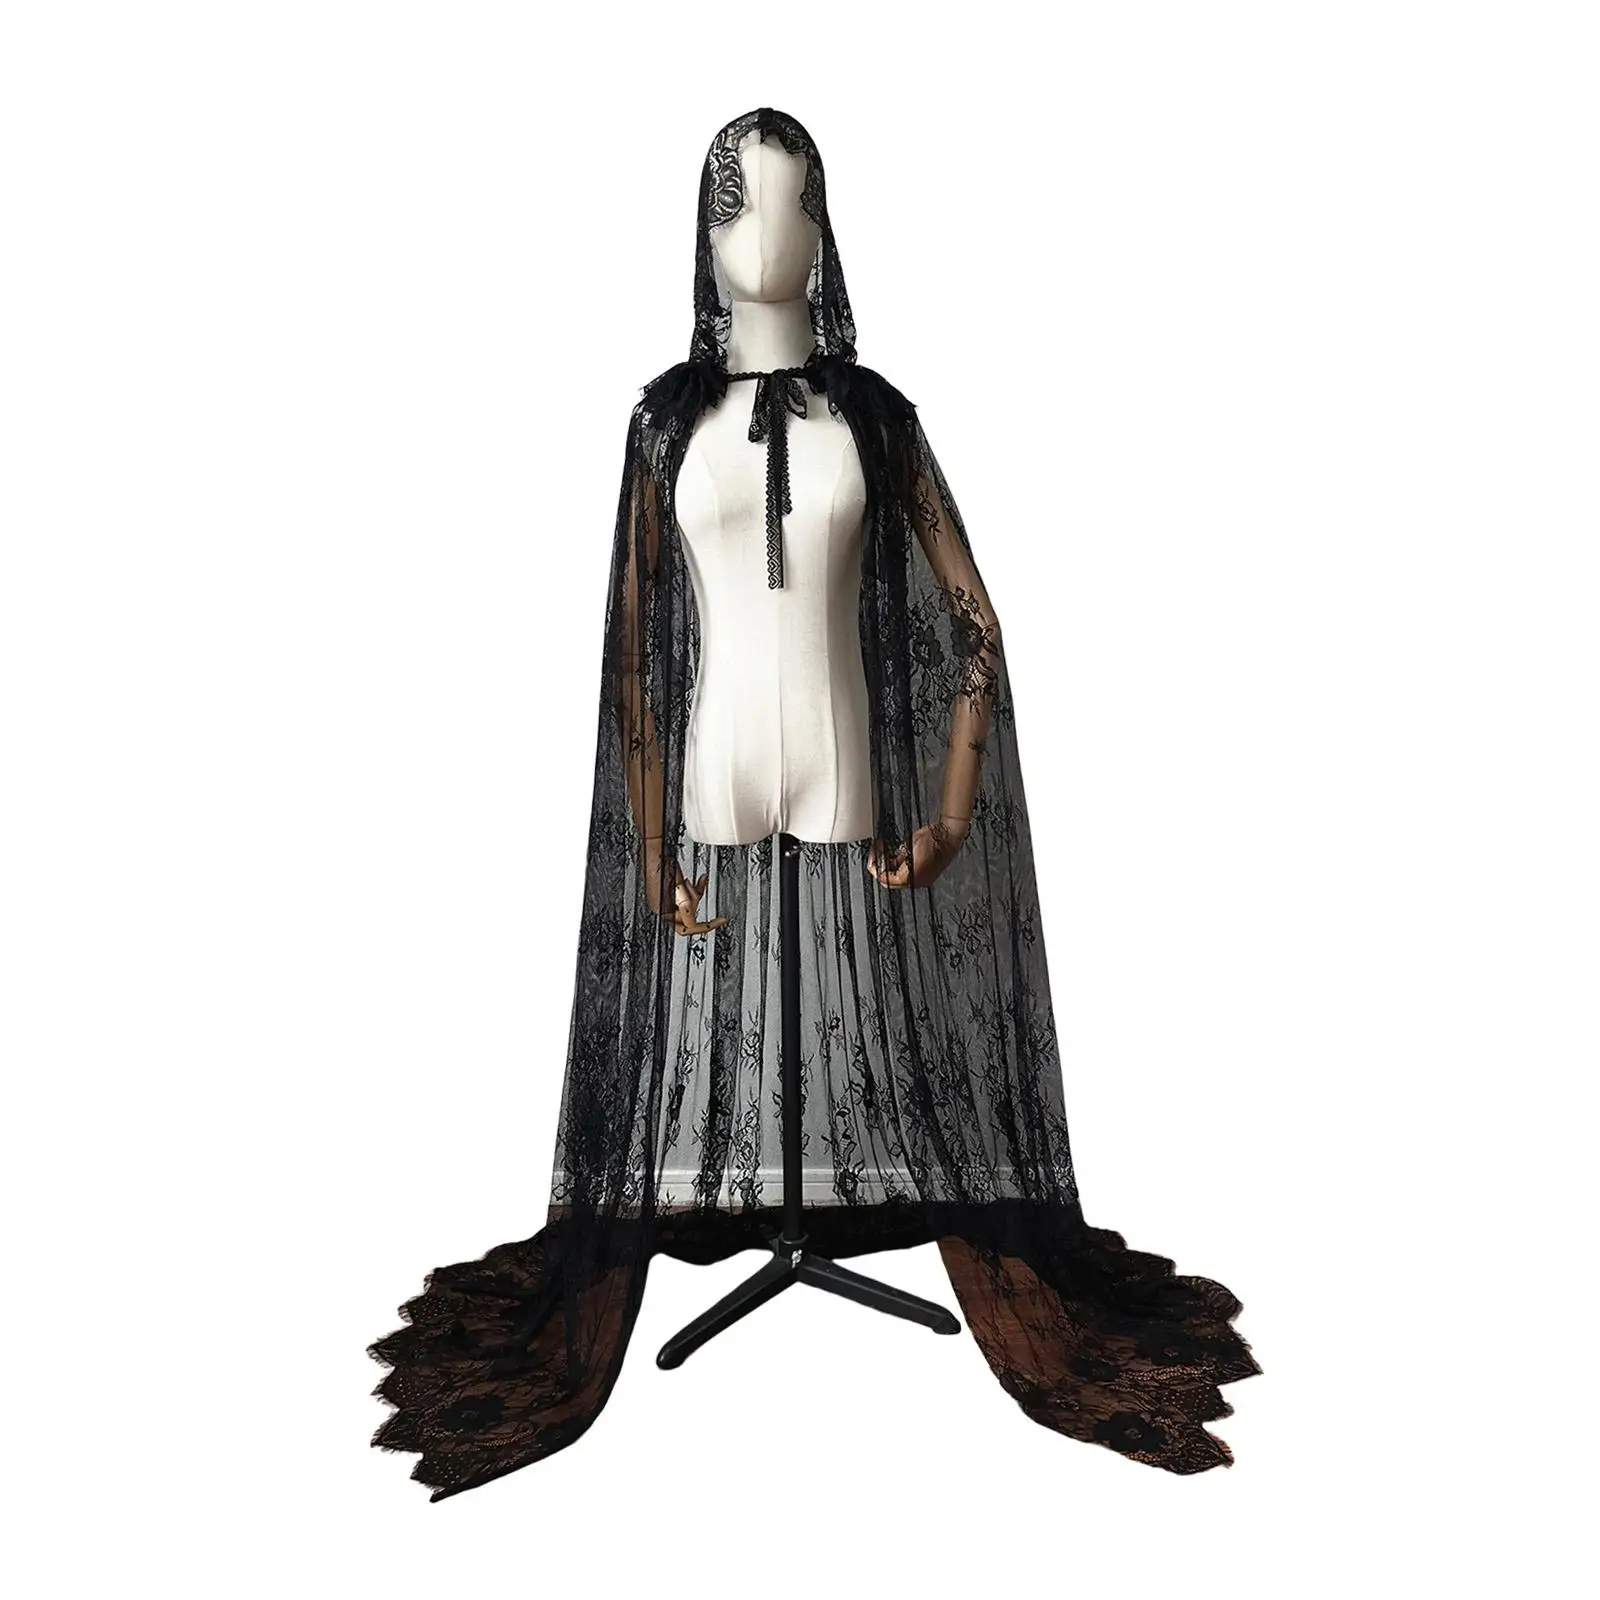 Hooded Cloak Long Cape Halloween Costume Graceful Lace Cape for Ball Stage Performances Medieval Costumes Masquerade Dress up